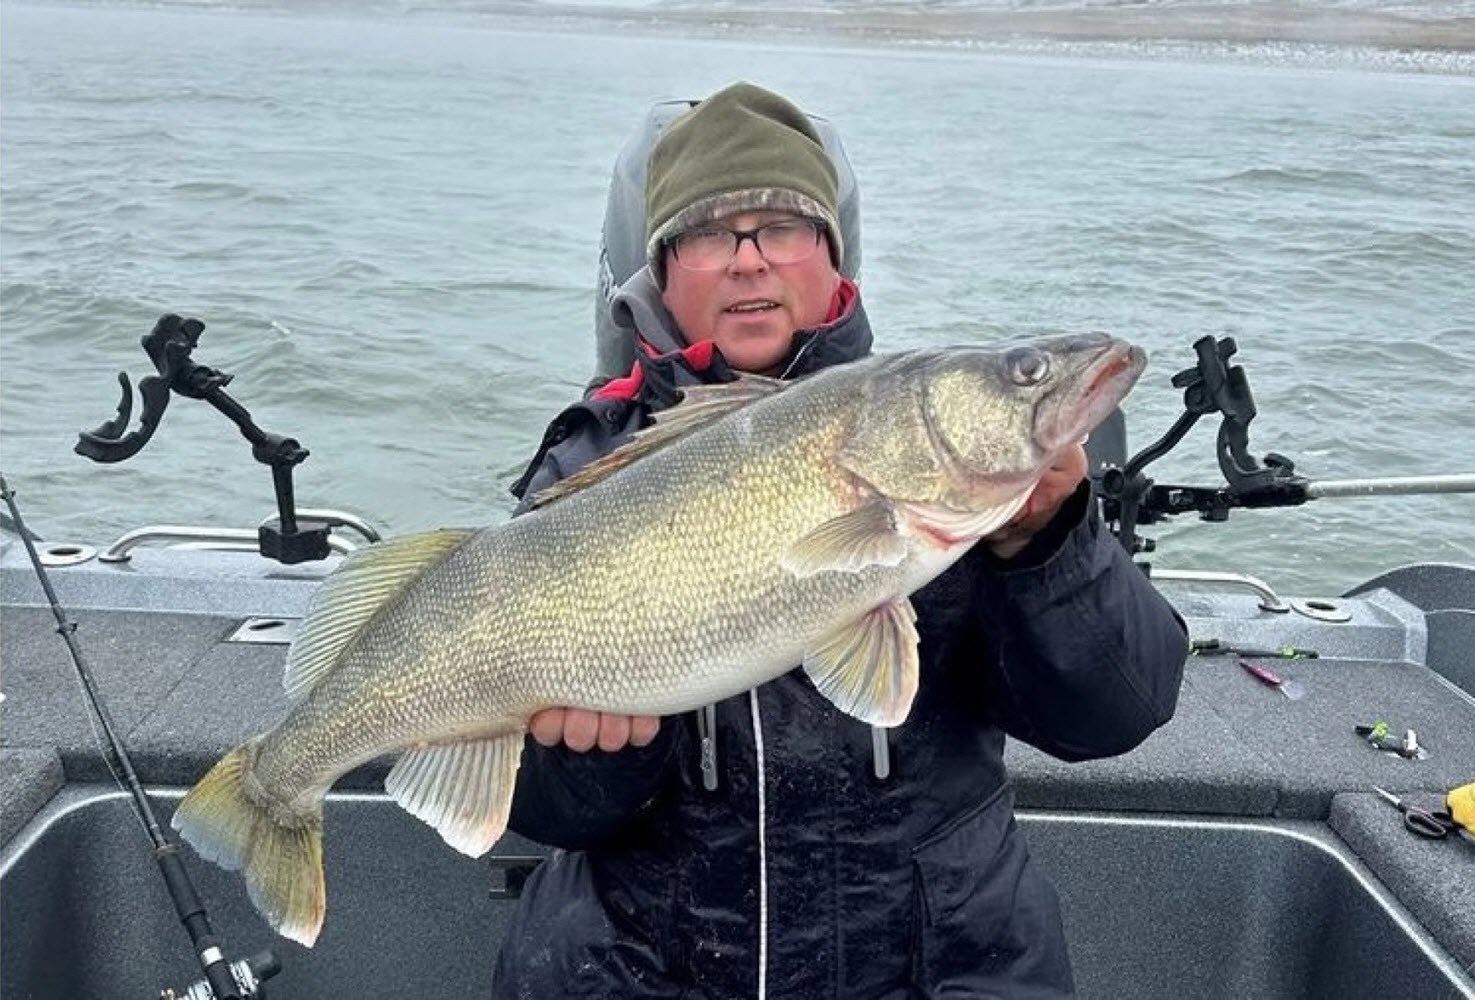 Aaron Schuck shows off his state record 16.8-pound walleye from South Dakota's Lake Oahe.